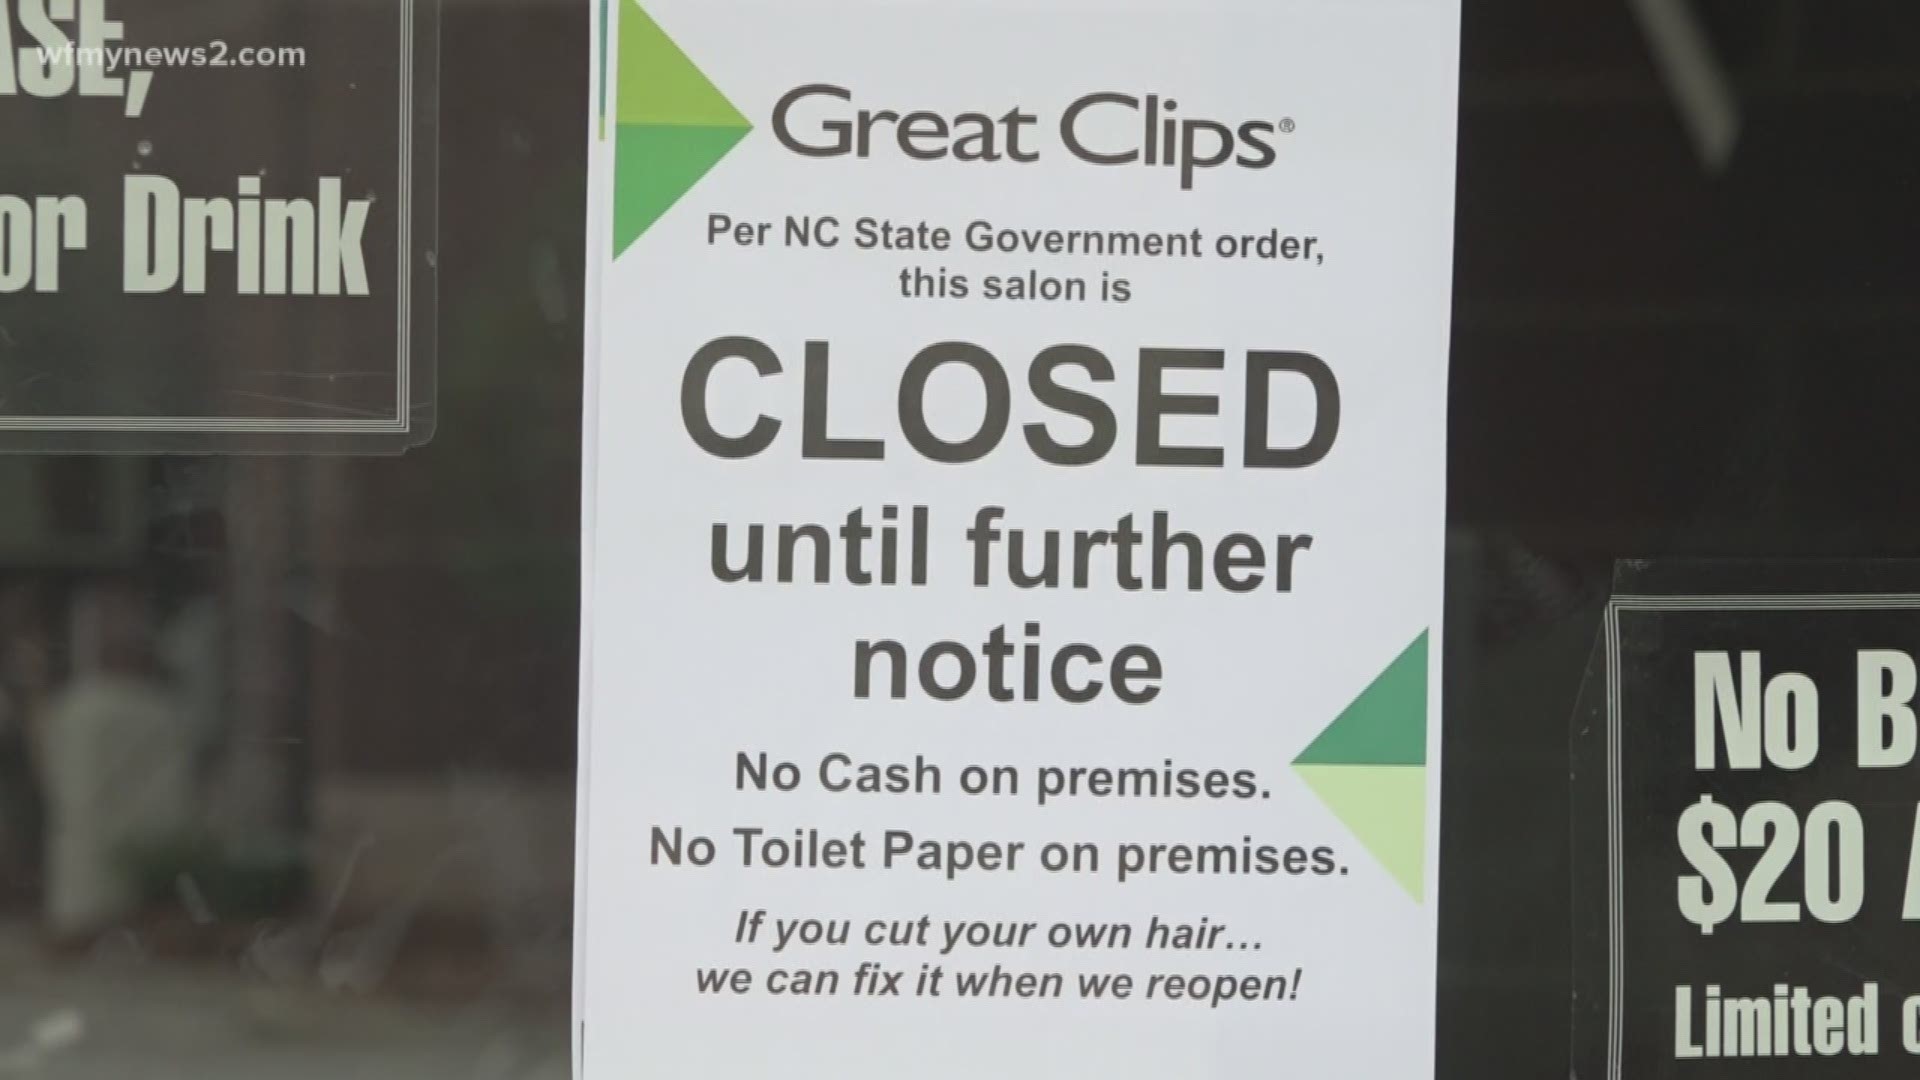 Impacted businesses have until 5pm Wednesday to close. The short window has left both clients and owners scrambling.